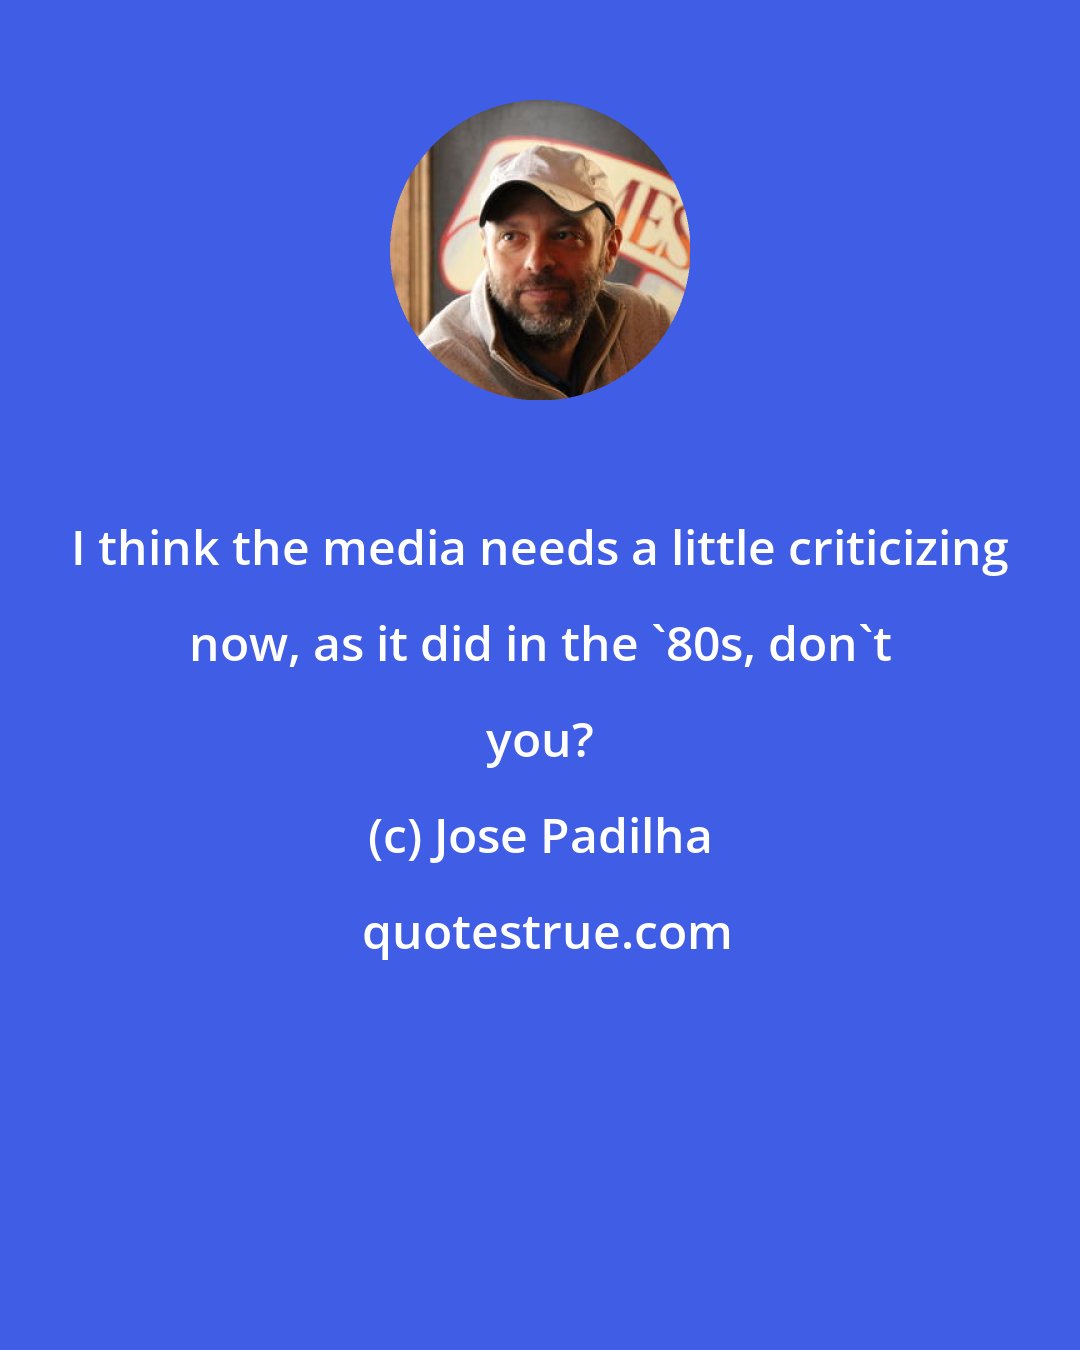 Jose Padilha: I think the media needs a little criticizing now, as it did in the '80s, don't you?